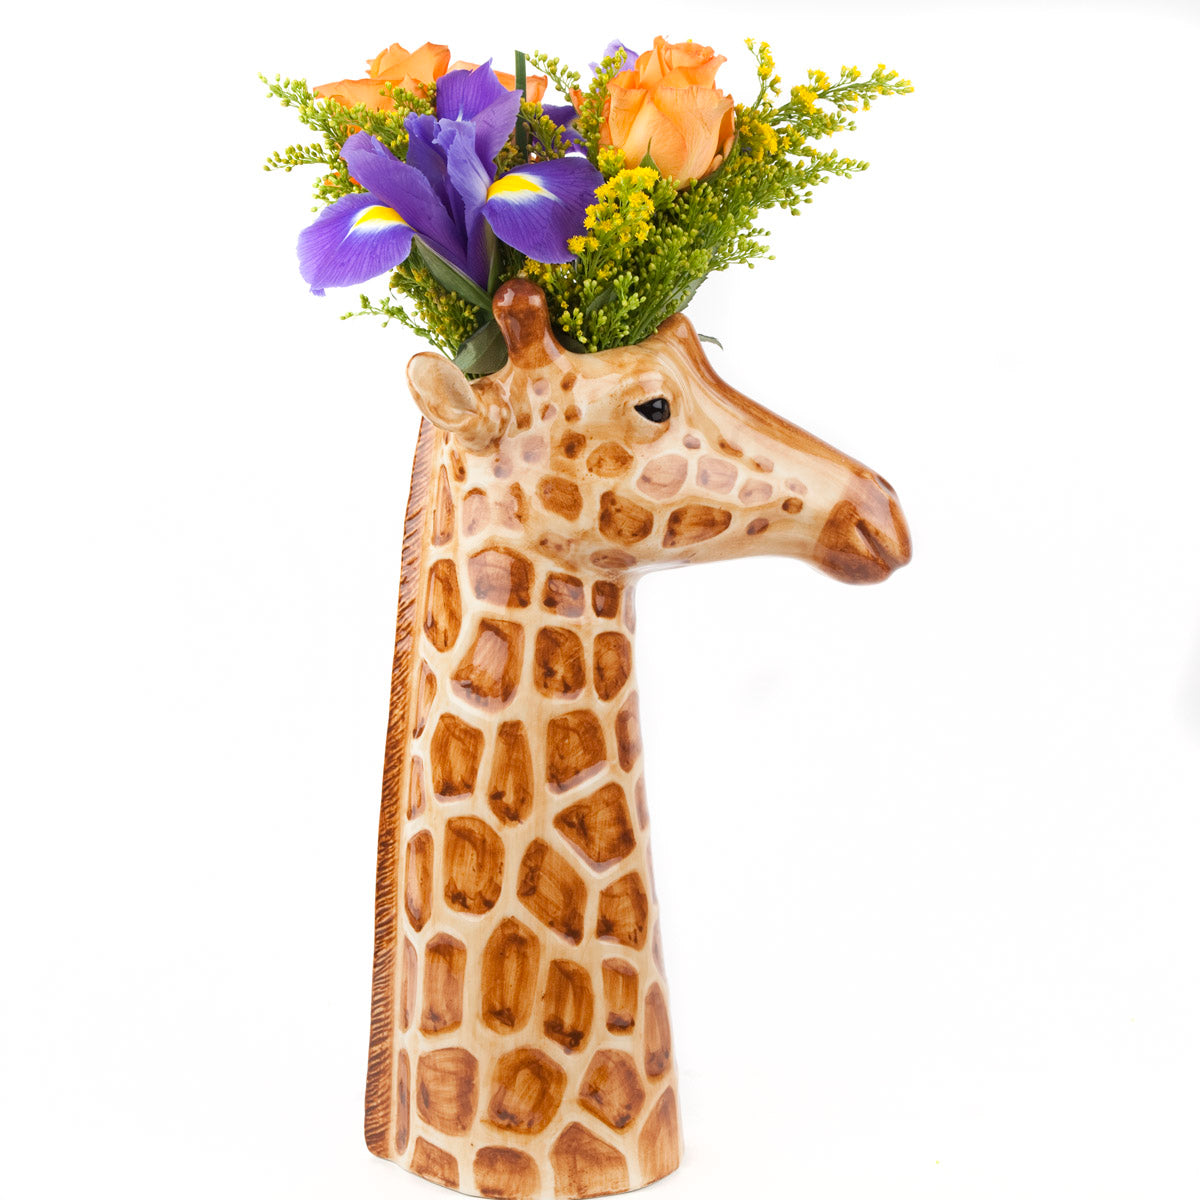 A quirky Giraffe Ceramic vase with flowers in it, created by Quail, a British brand known for its unique and whimsical pieces.